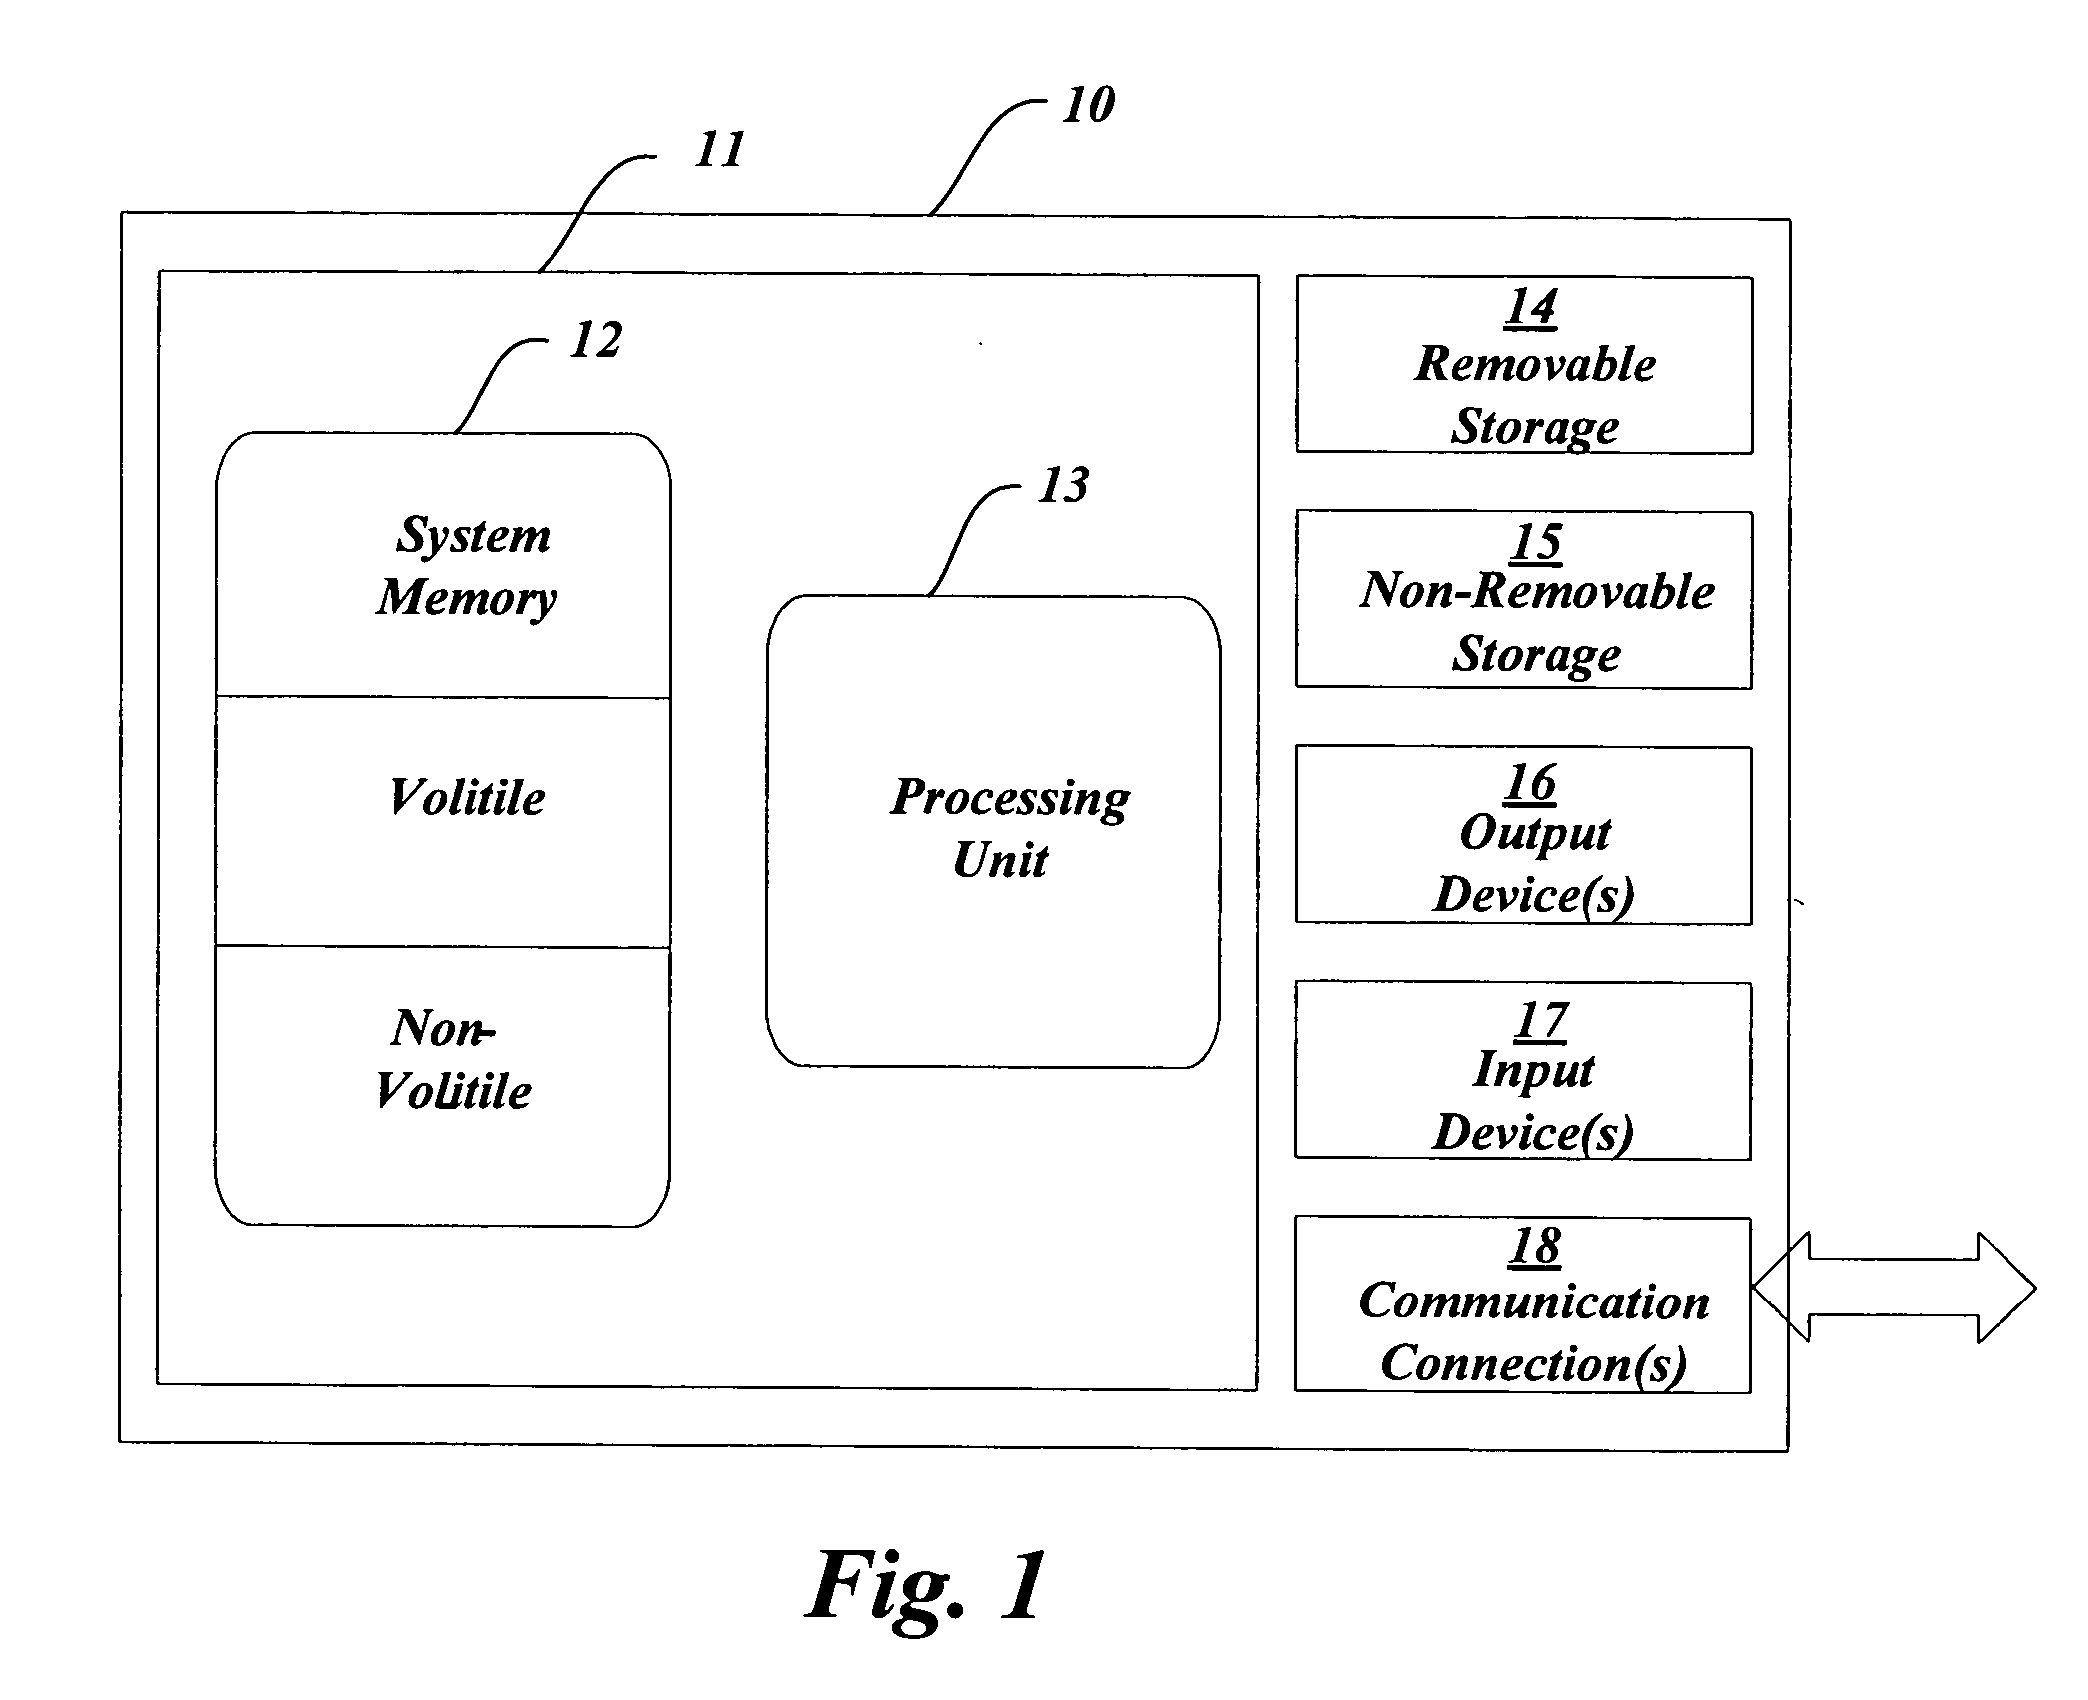 Systems and methods for creating a template from an existing file